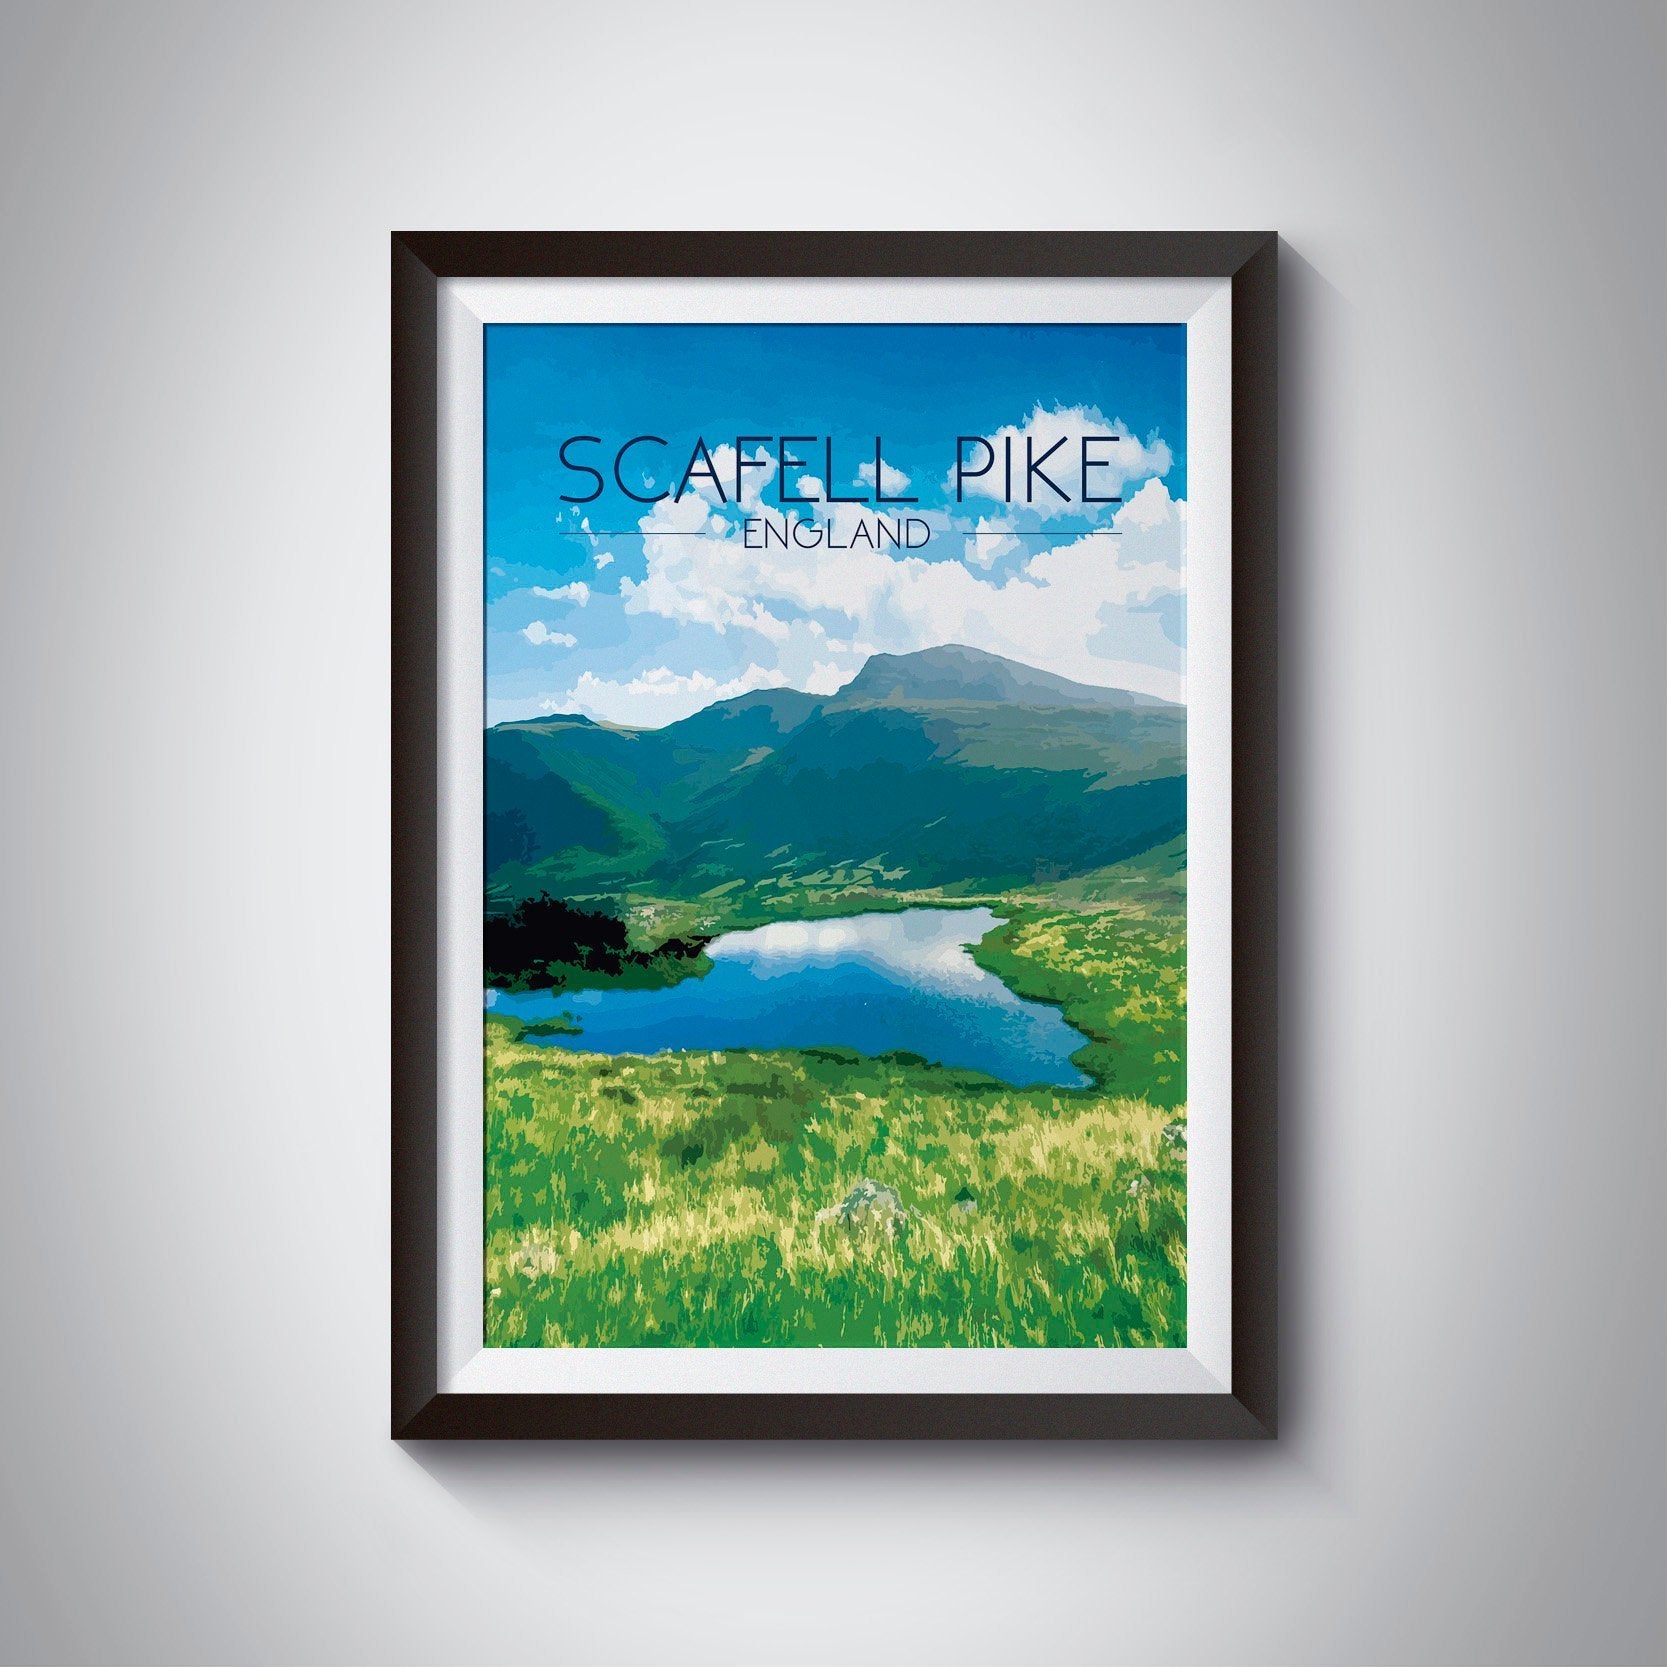 Scafell Pike Travel Poster